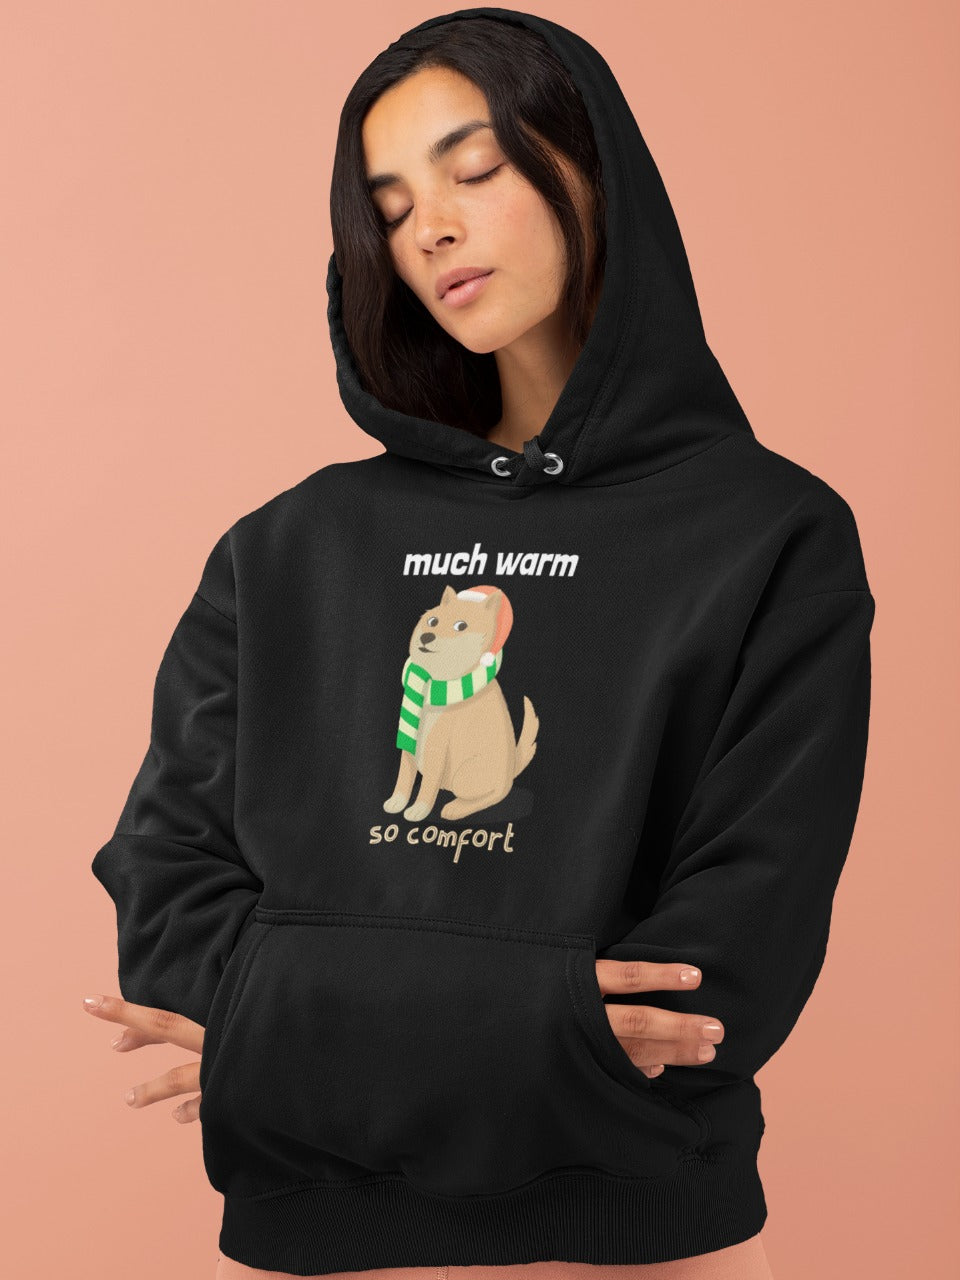 girl in relaxed mood wearing a black hoodie with picture of cute doggo wearing a scarf printed on it with the message much warm so comfort